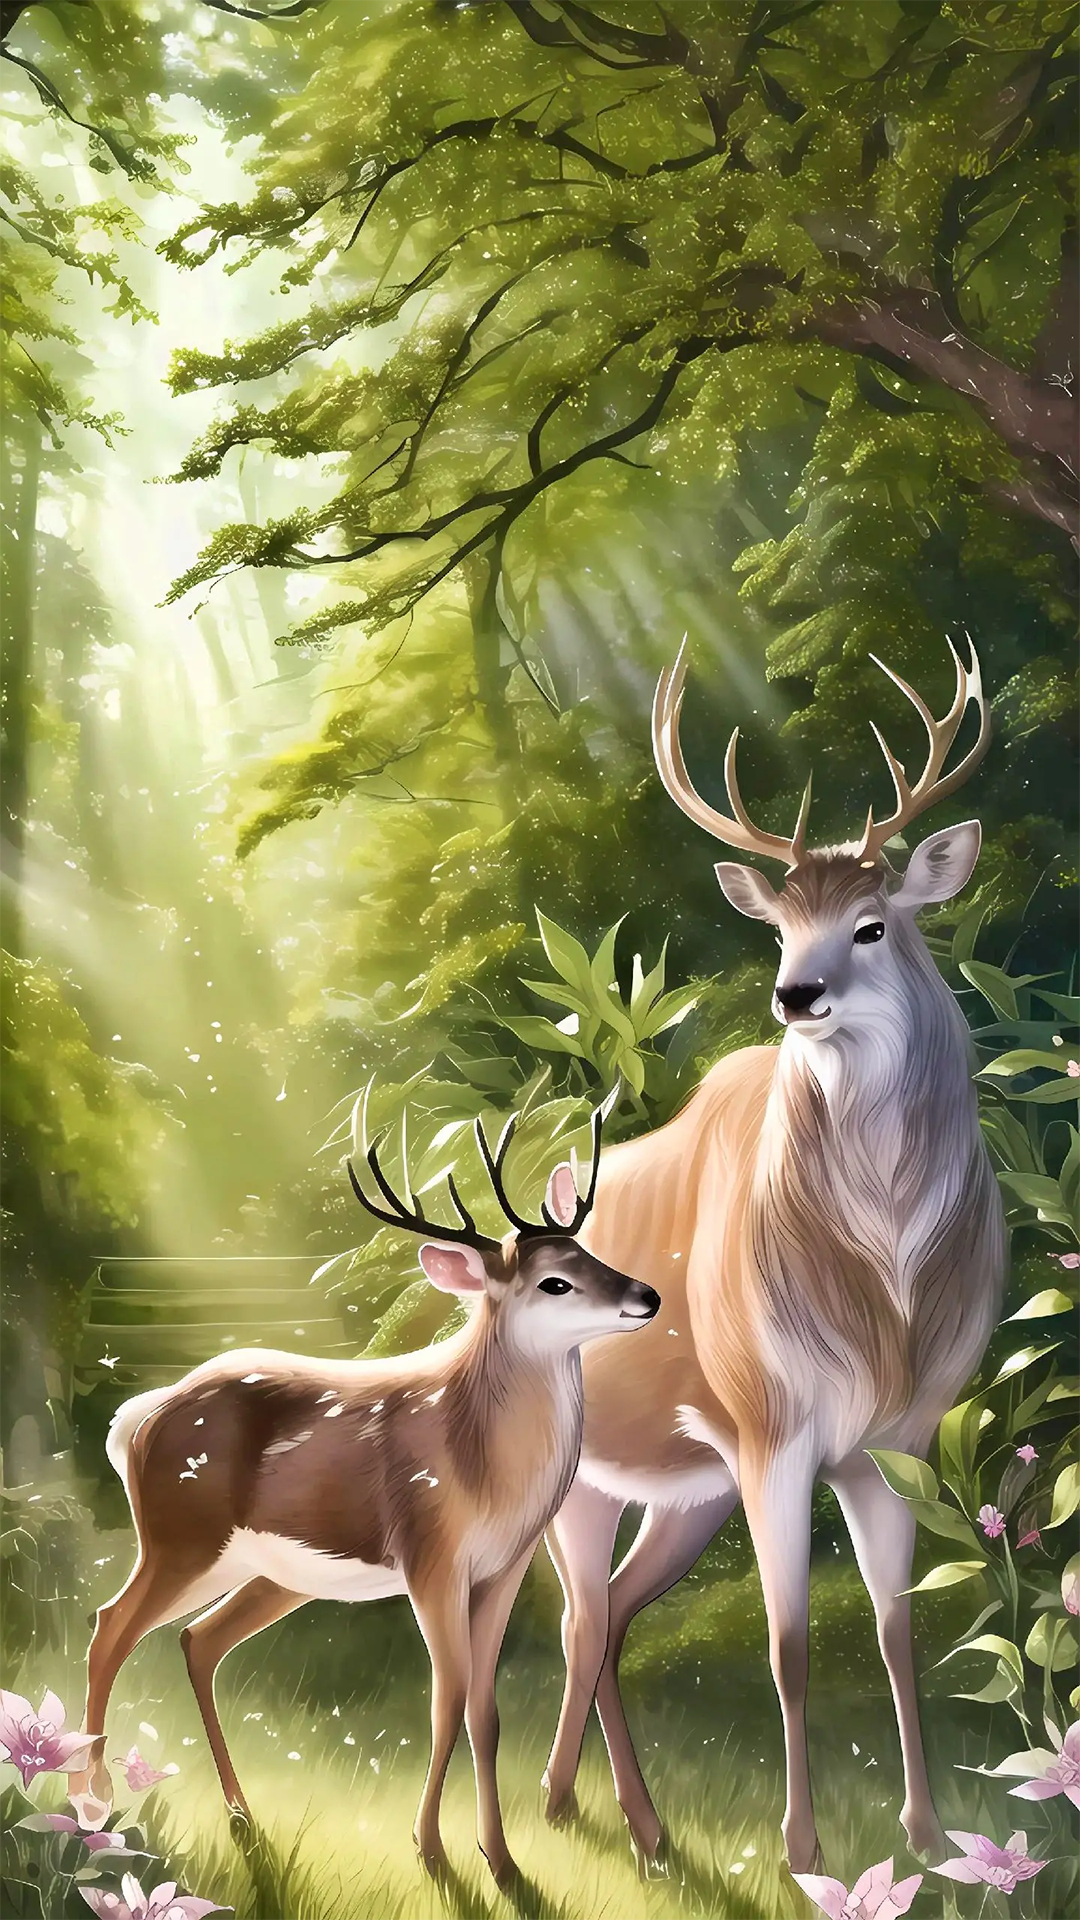 General 1080x1920 creature deer forest animals portrait display flowers leaves trees grass sunlight fur natural light antlers